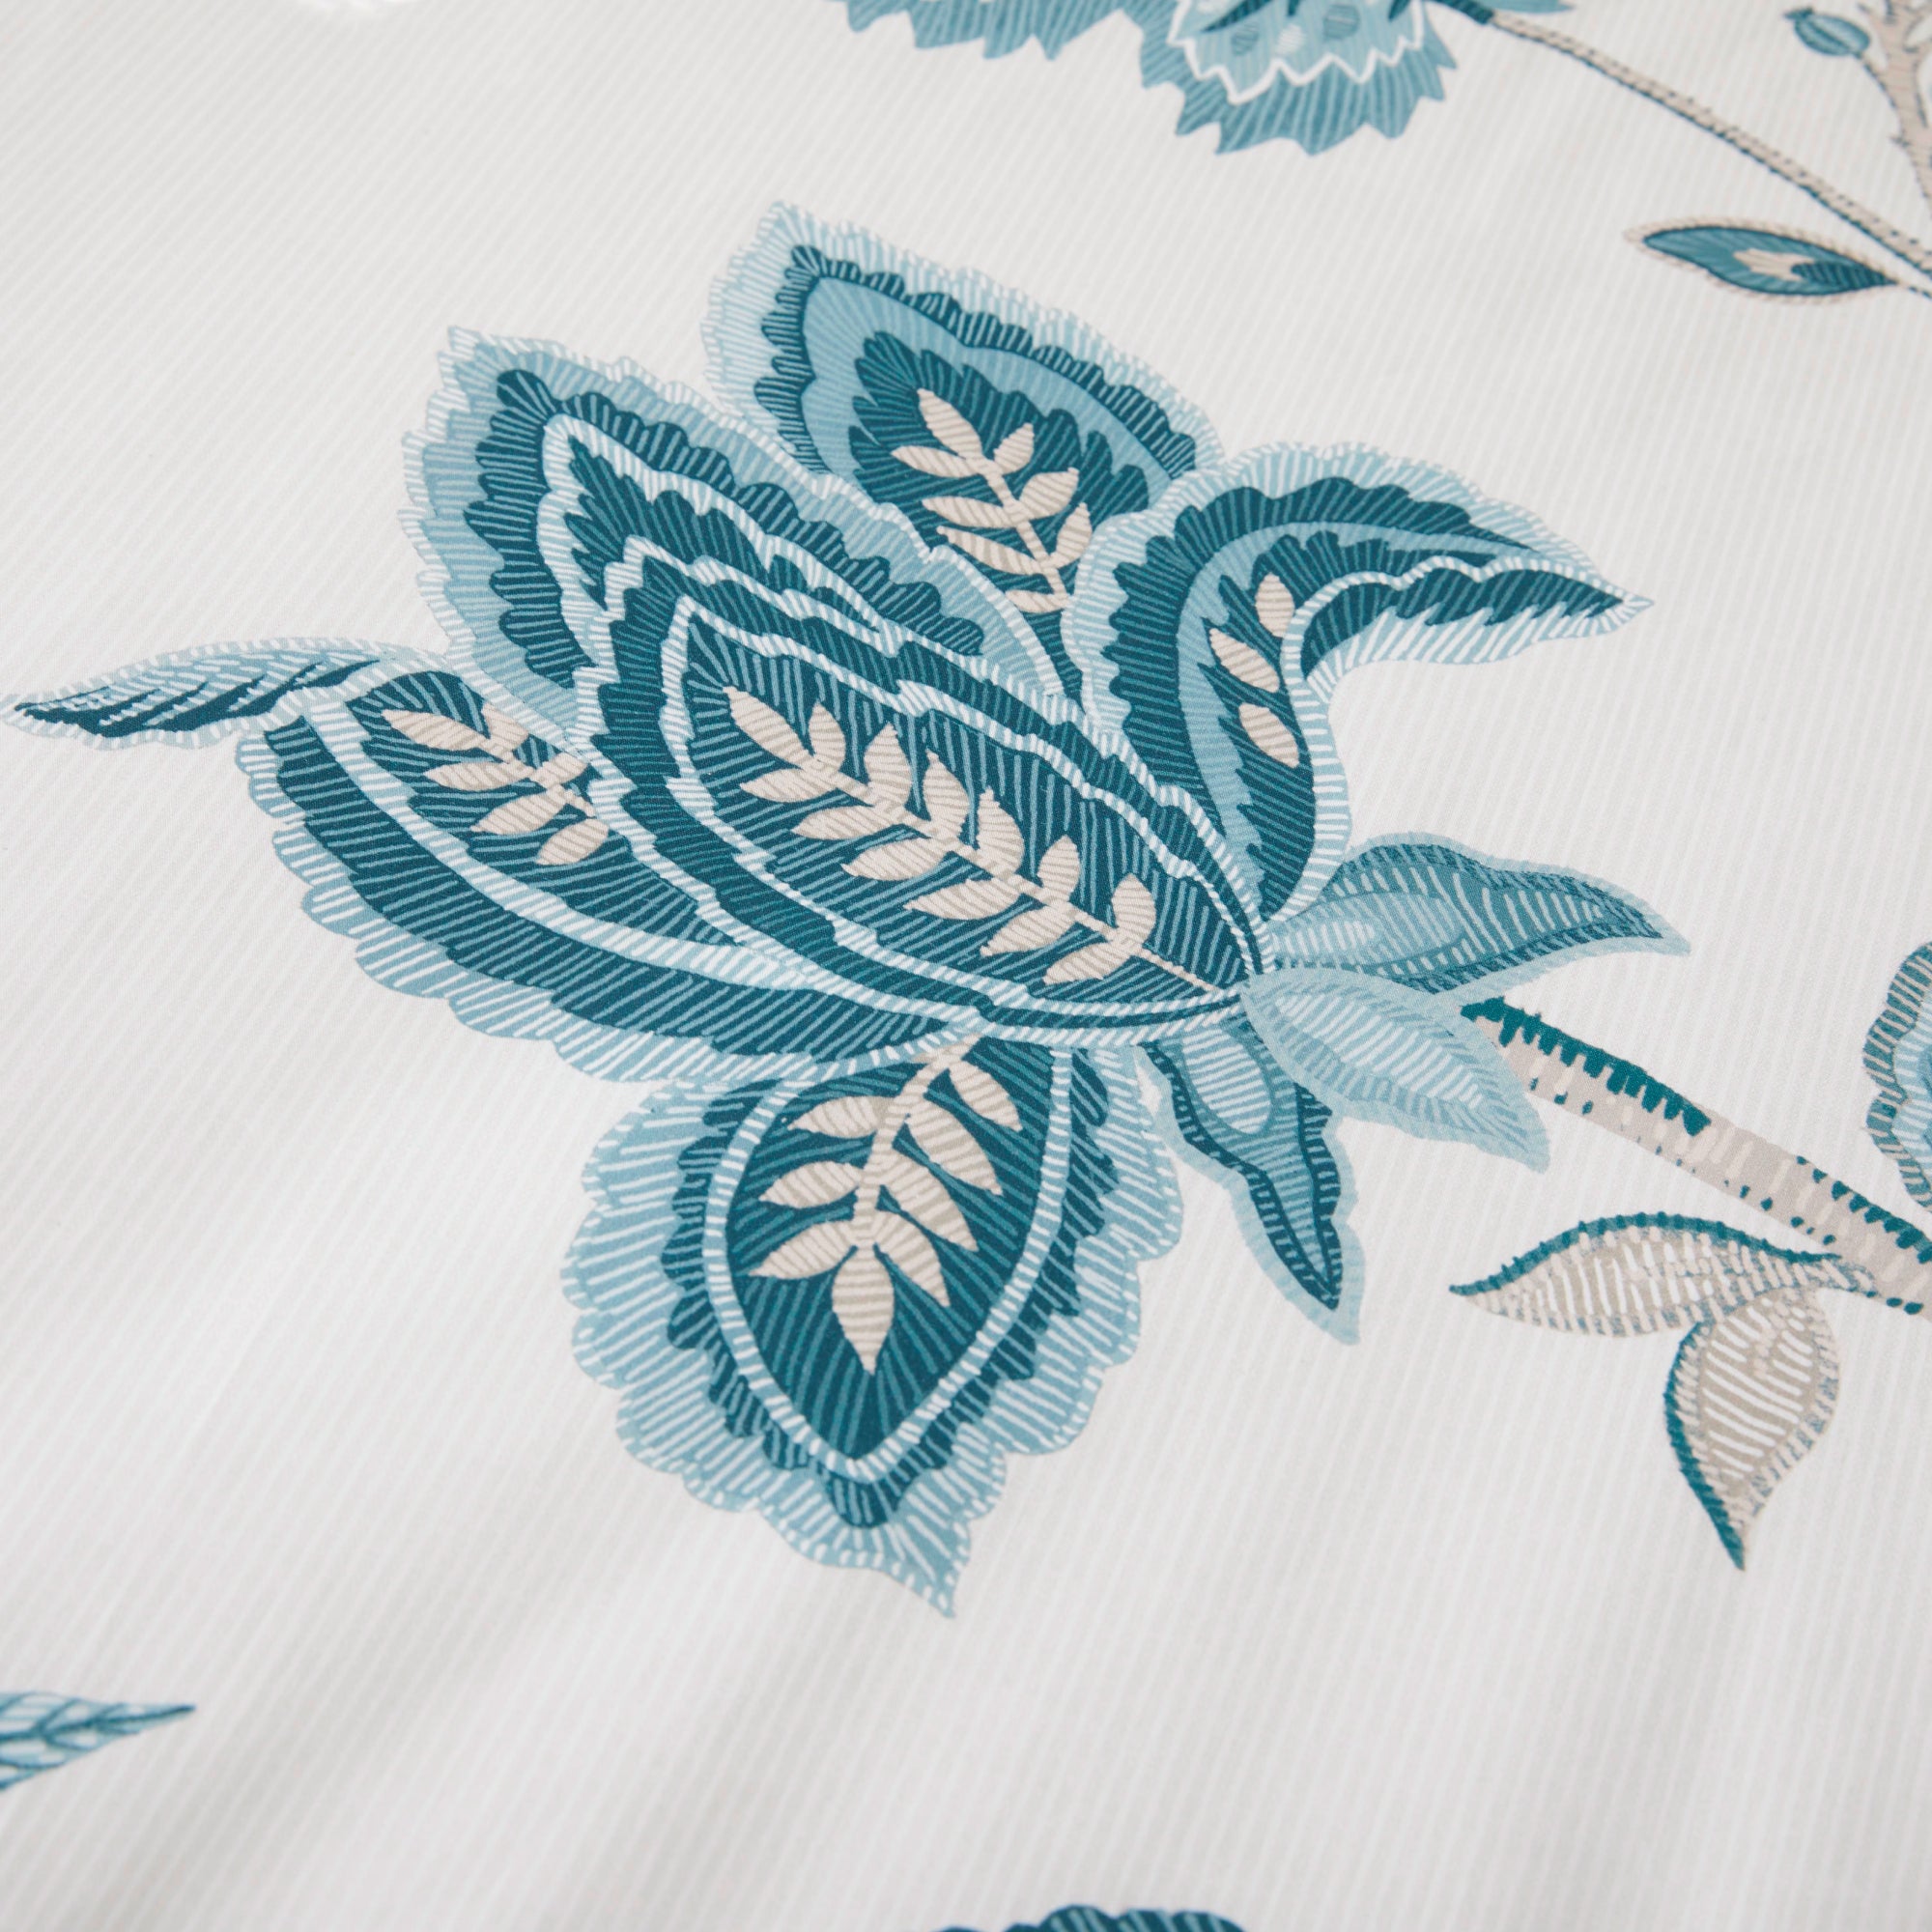 Duvet Cover Set Samira by Dreams And Drapes Design in Teal